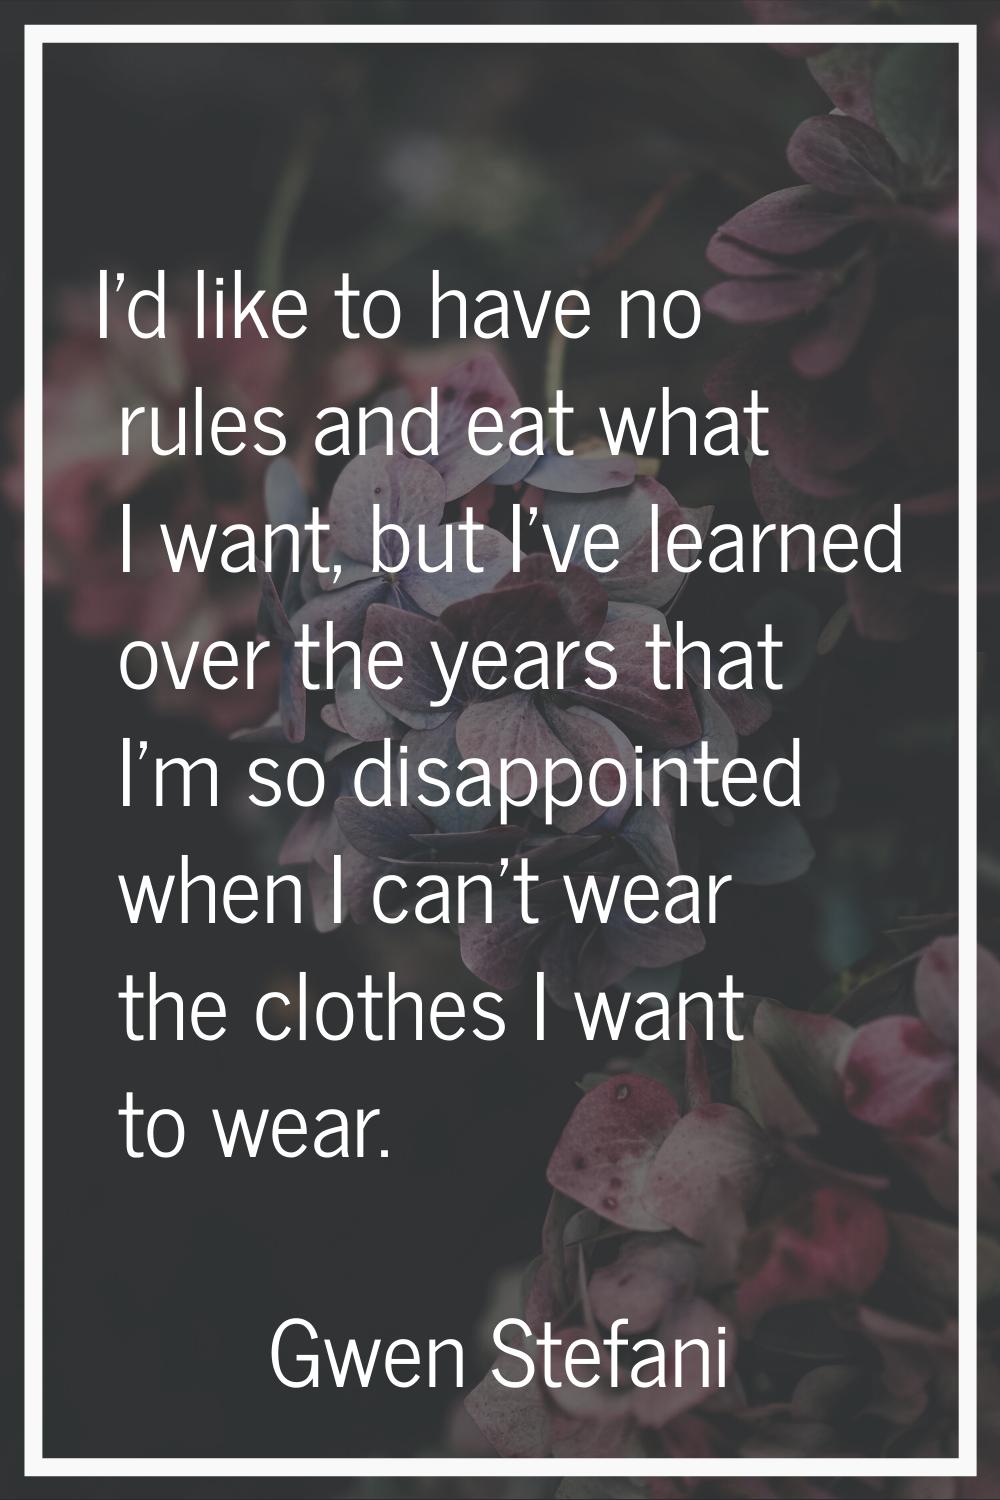 I'd like to have no rules and eat what I want, but I've learned over the years that I'm so disappoi